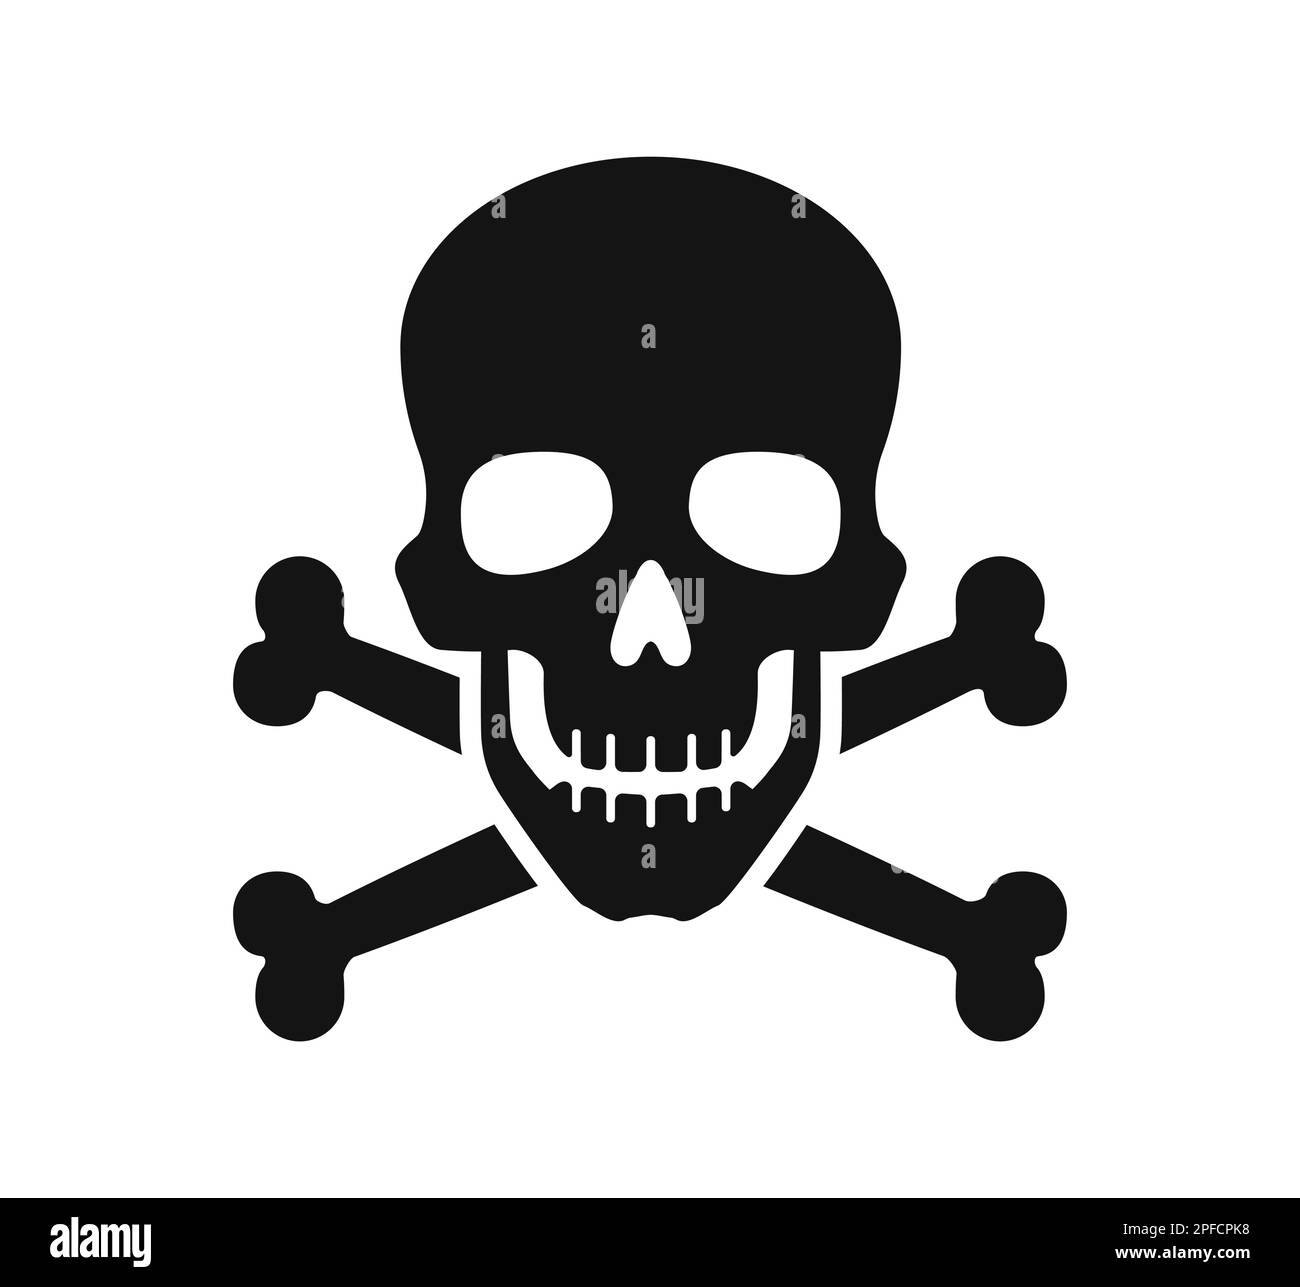 classic skull and crossbones symbol silhouette isolated on white background vector Stock Vector